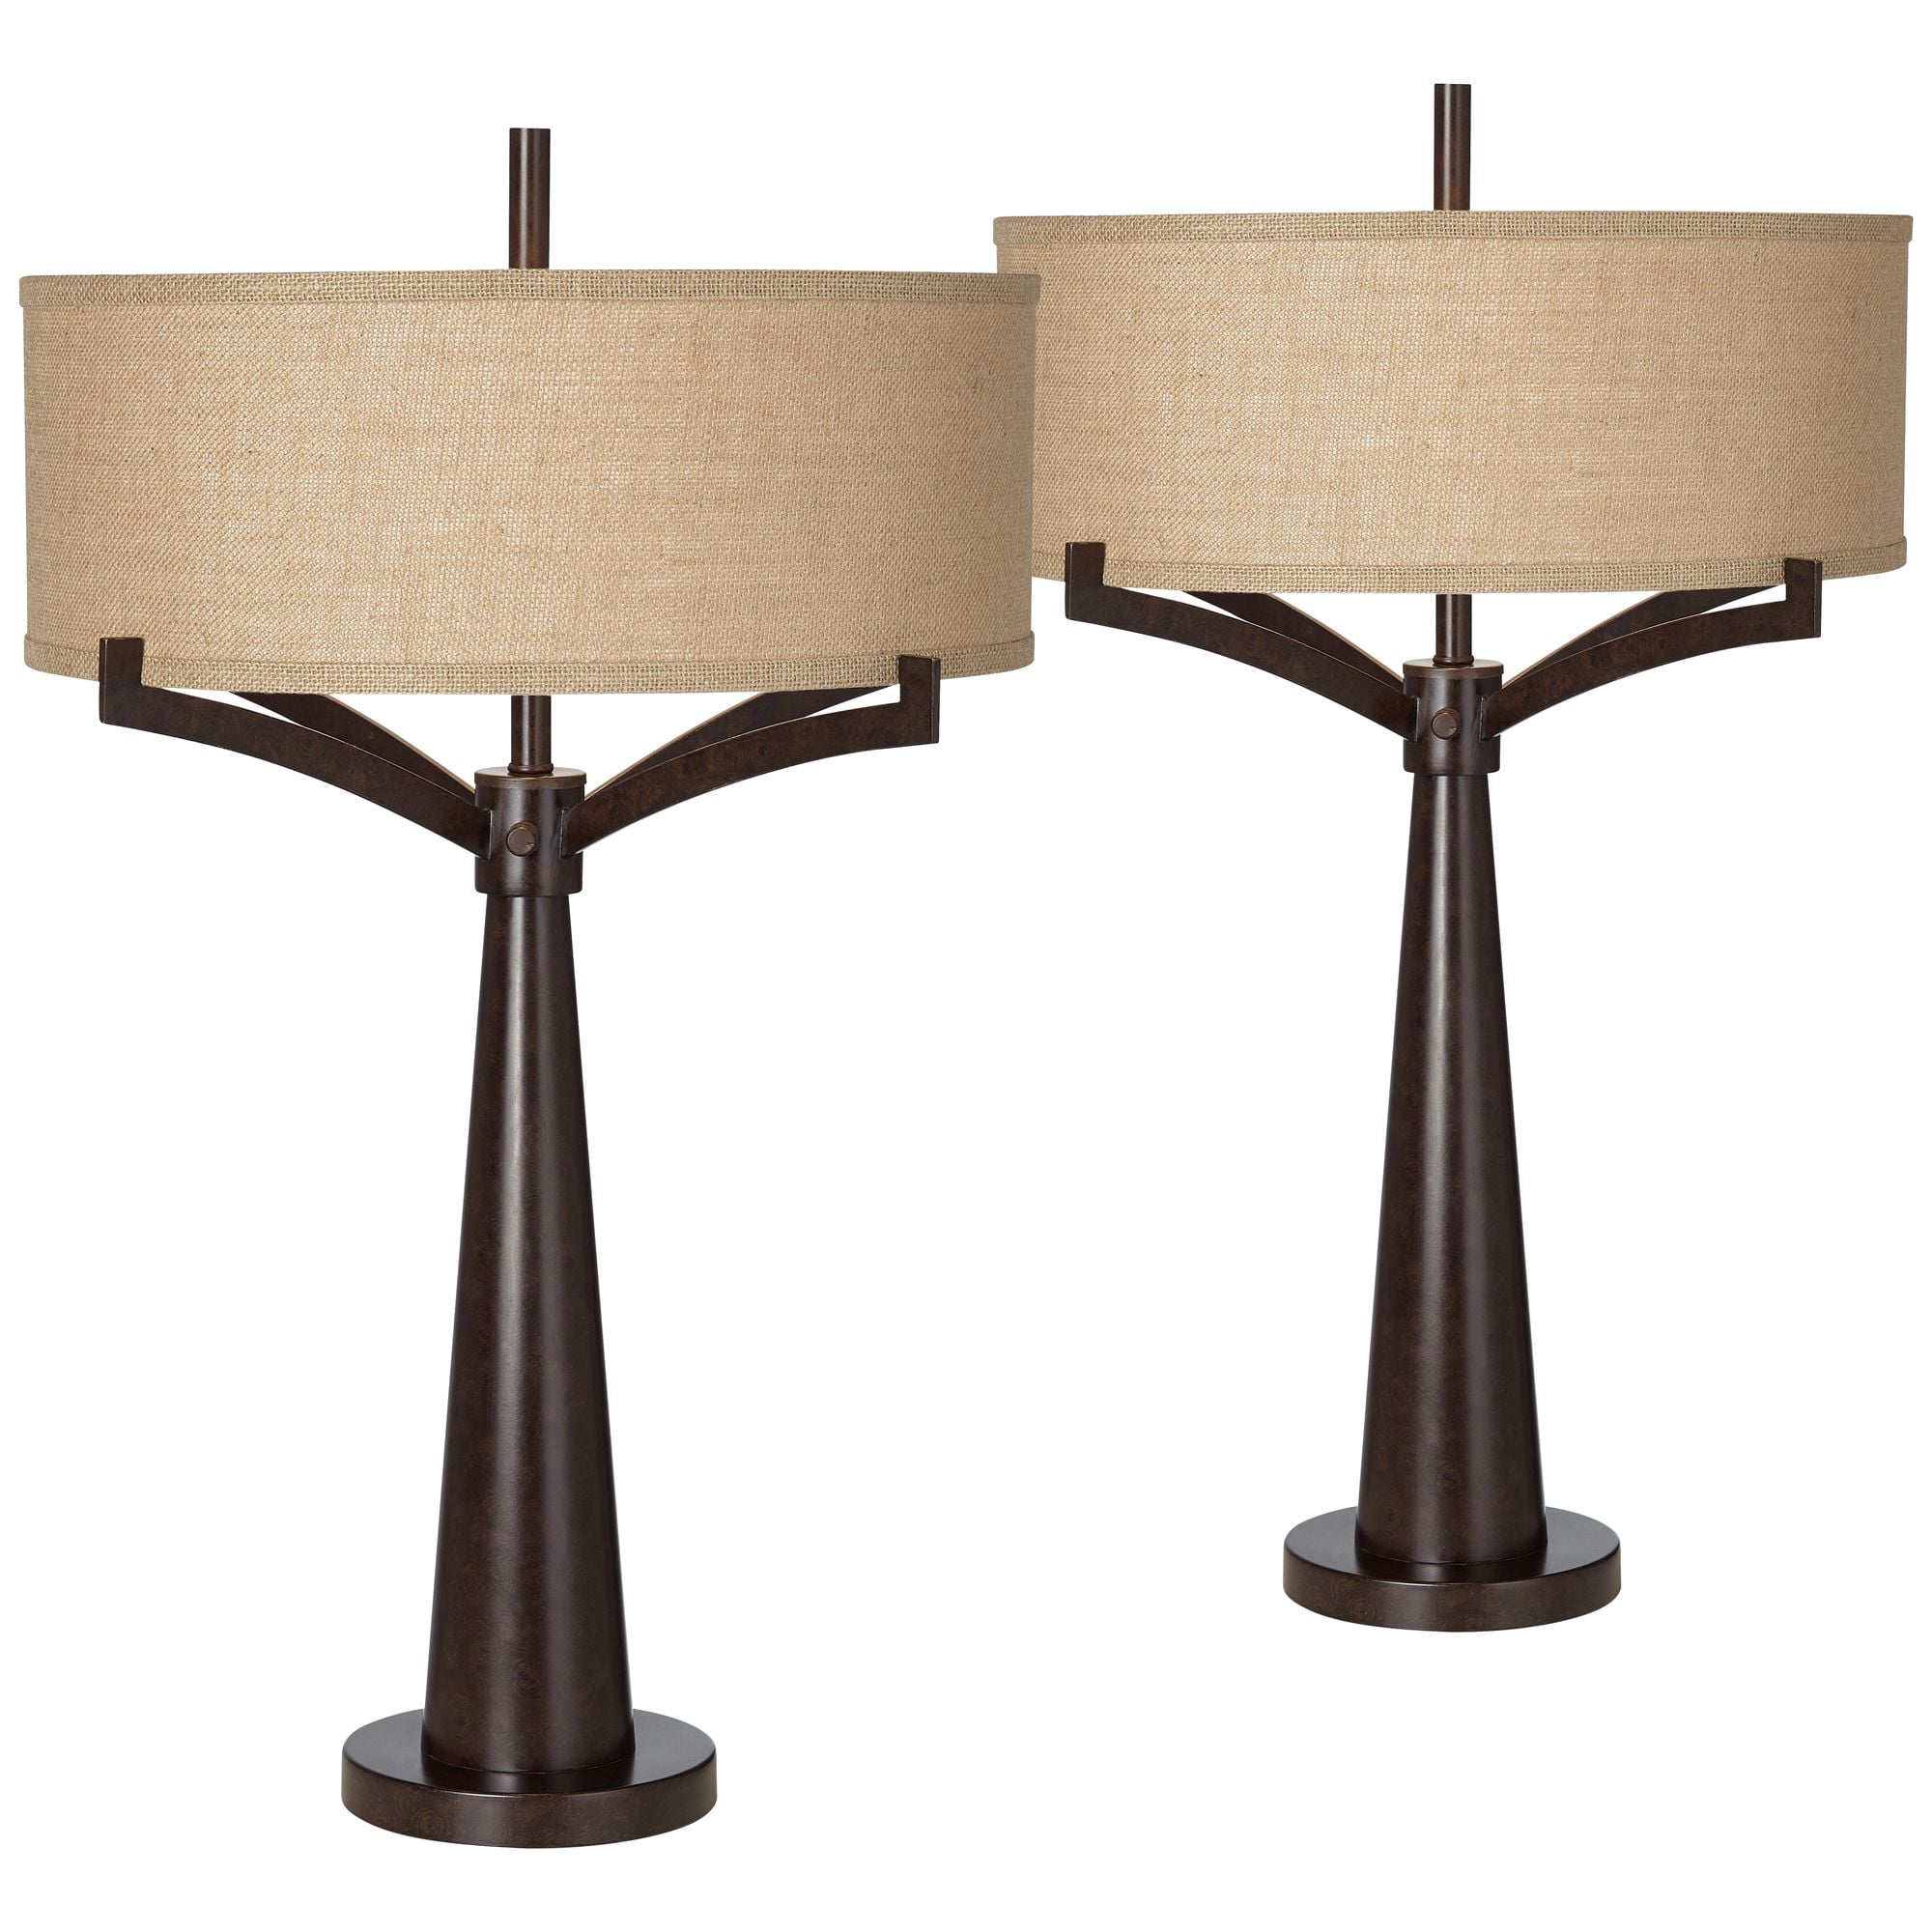 Franklin Iron Works Mid Century Modern Table Lamps Set of 2 Rich Bronze